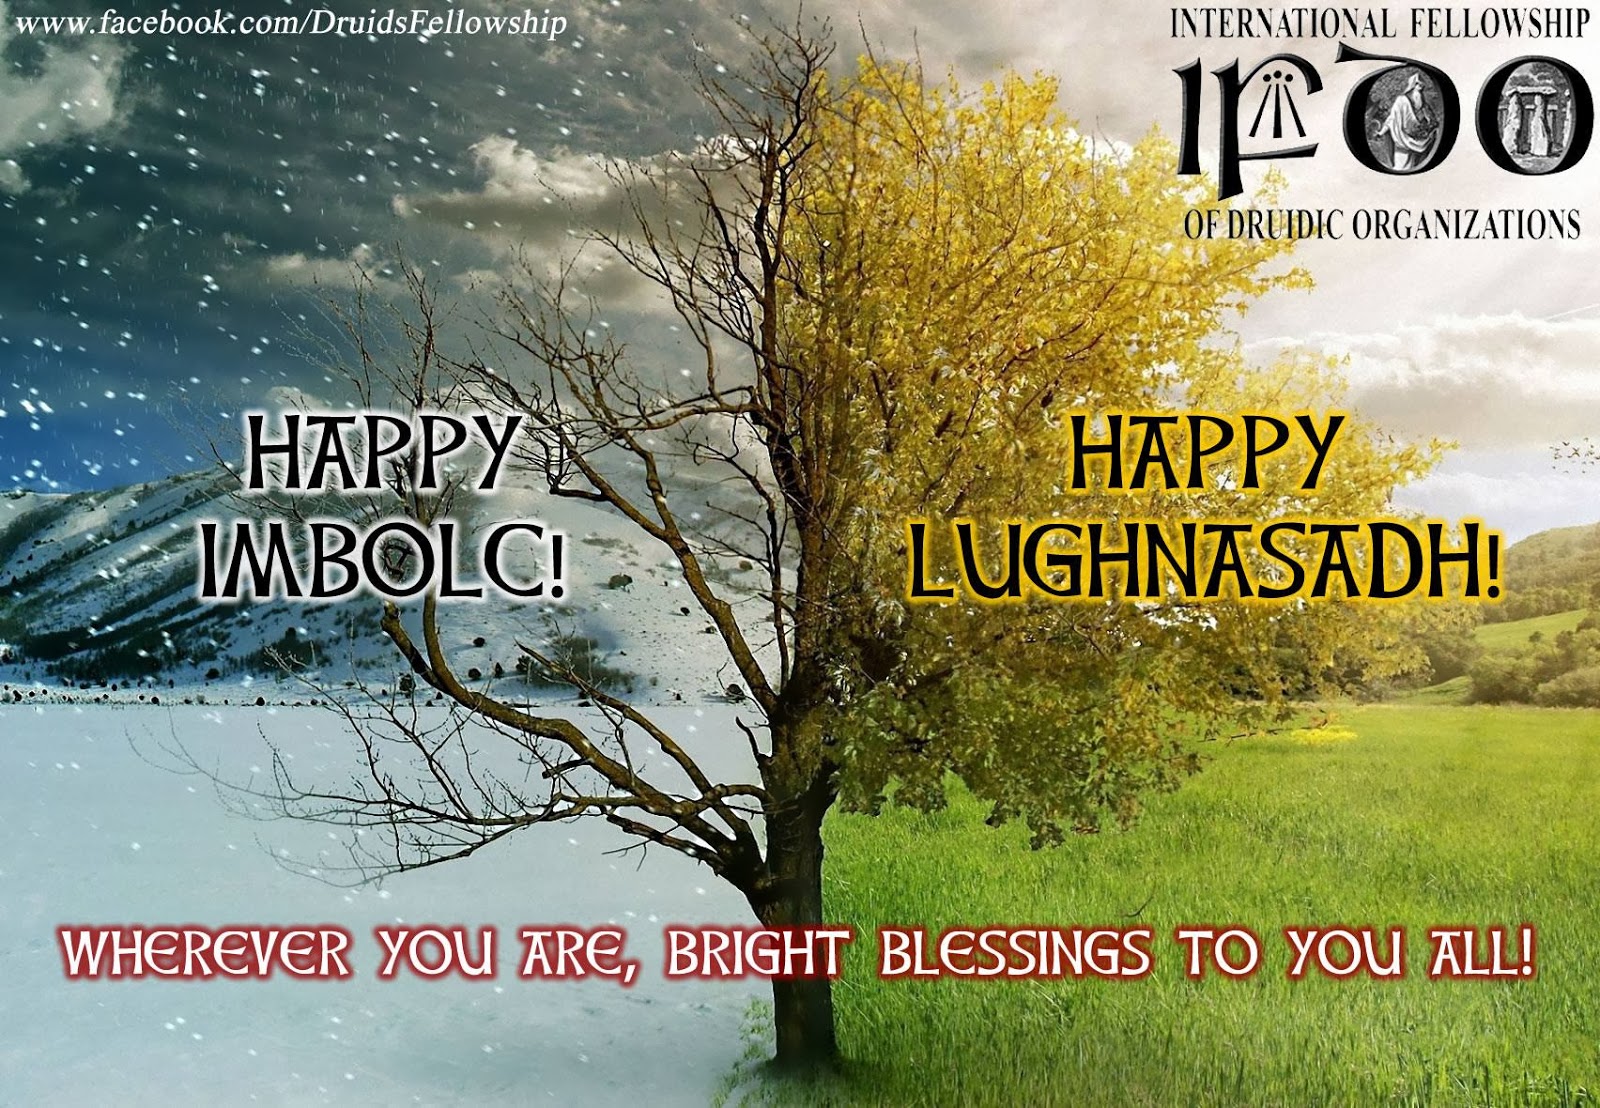 Happy Imbolc wherever you are, bright blessings to you all